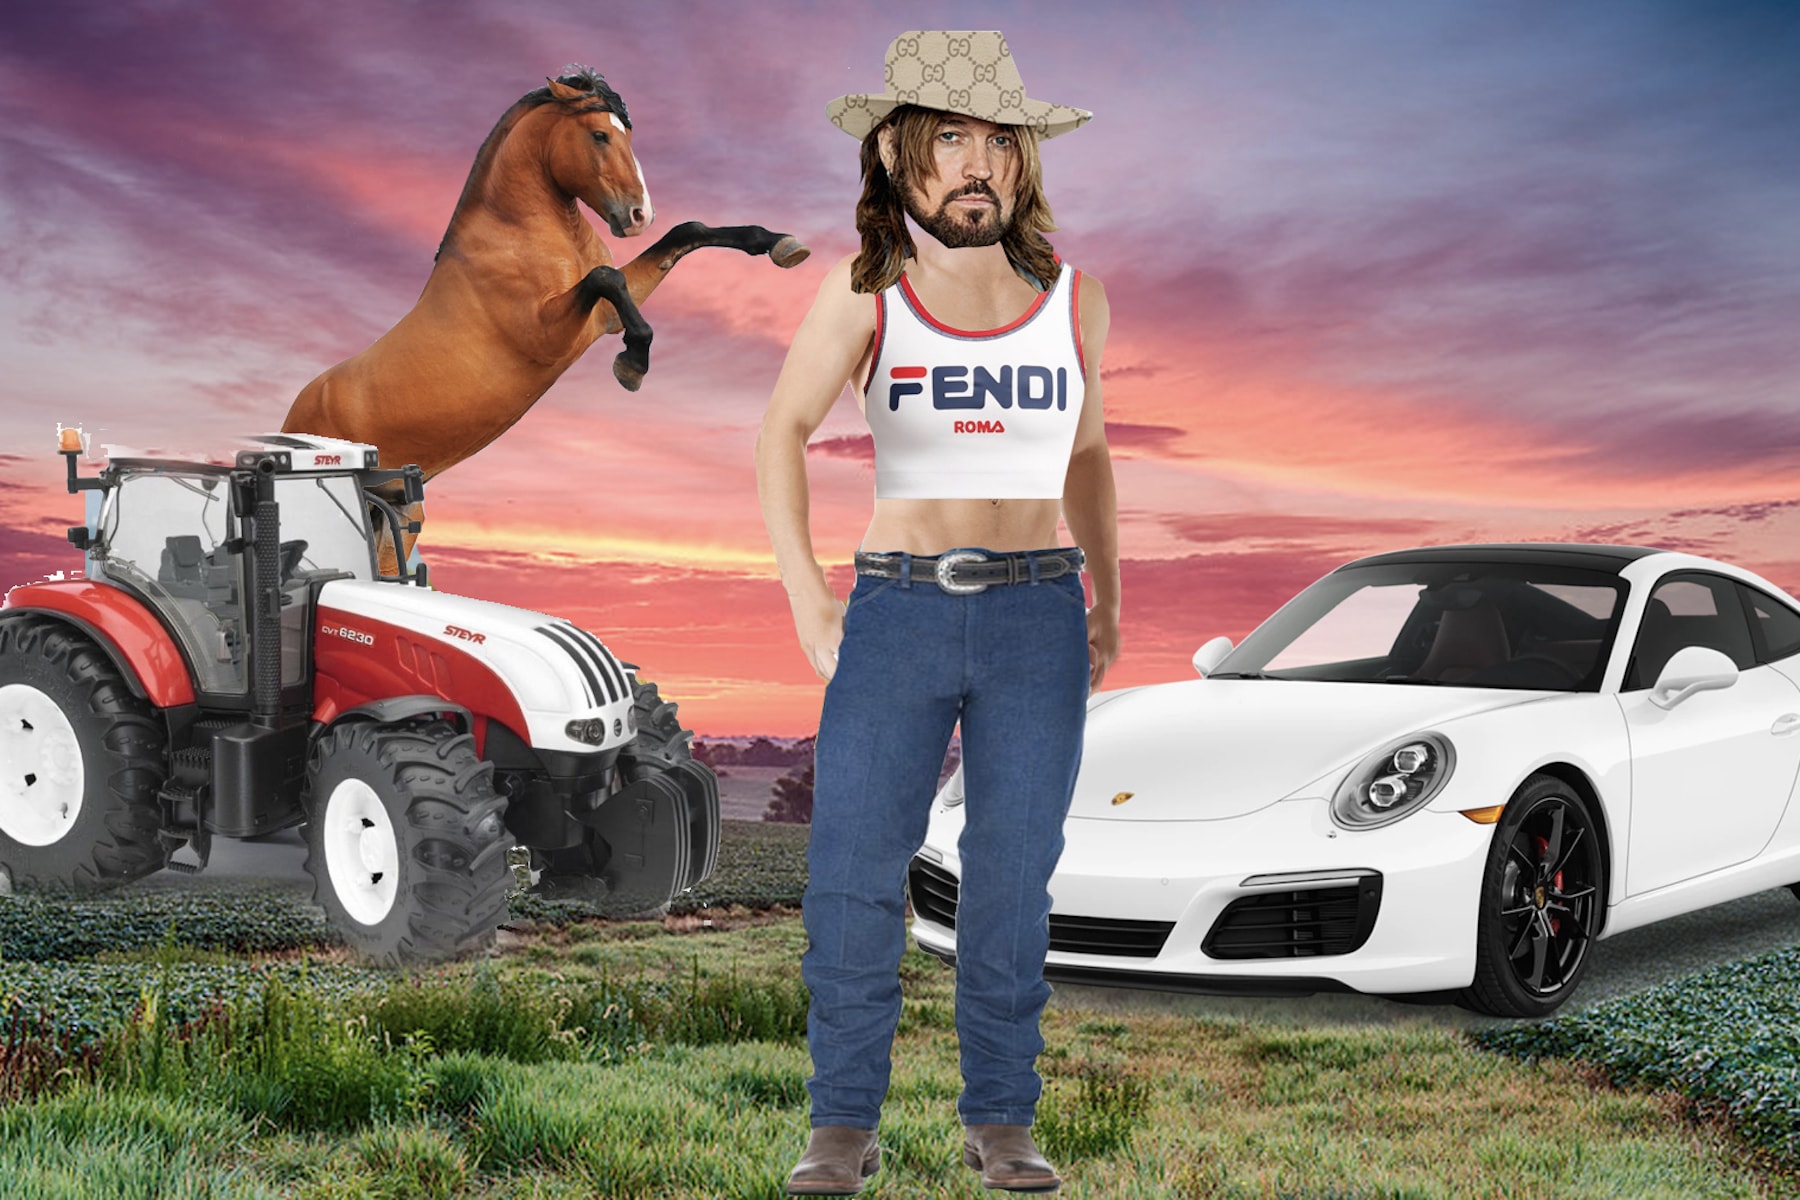 Billy Ray Cyrus "Old Town Road" Get the Look Lil Nas X Gucci Fendi Wrangler Fashion Single Song 